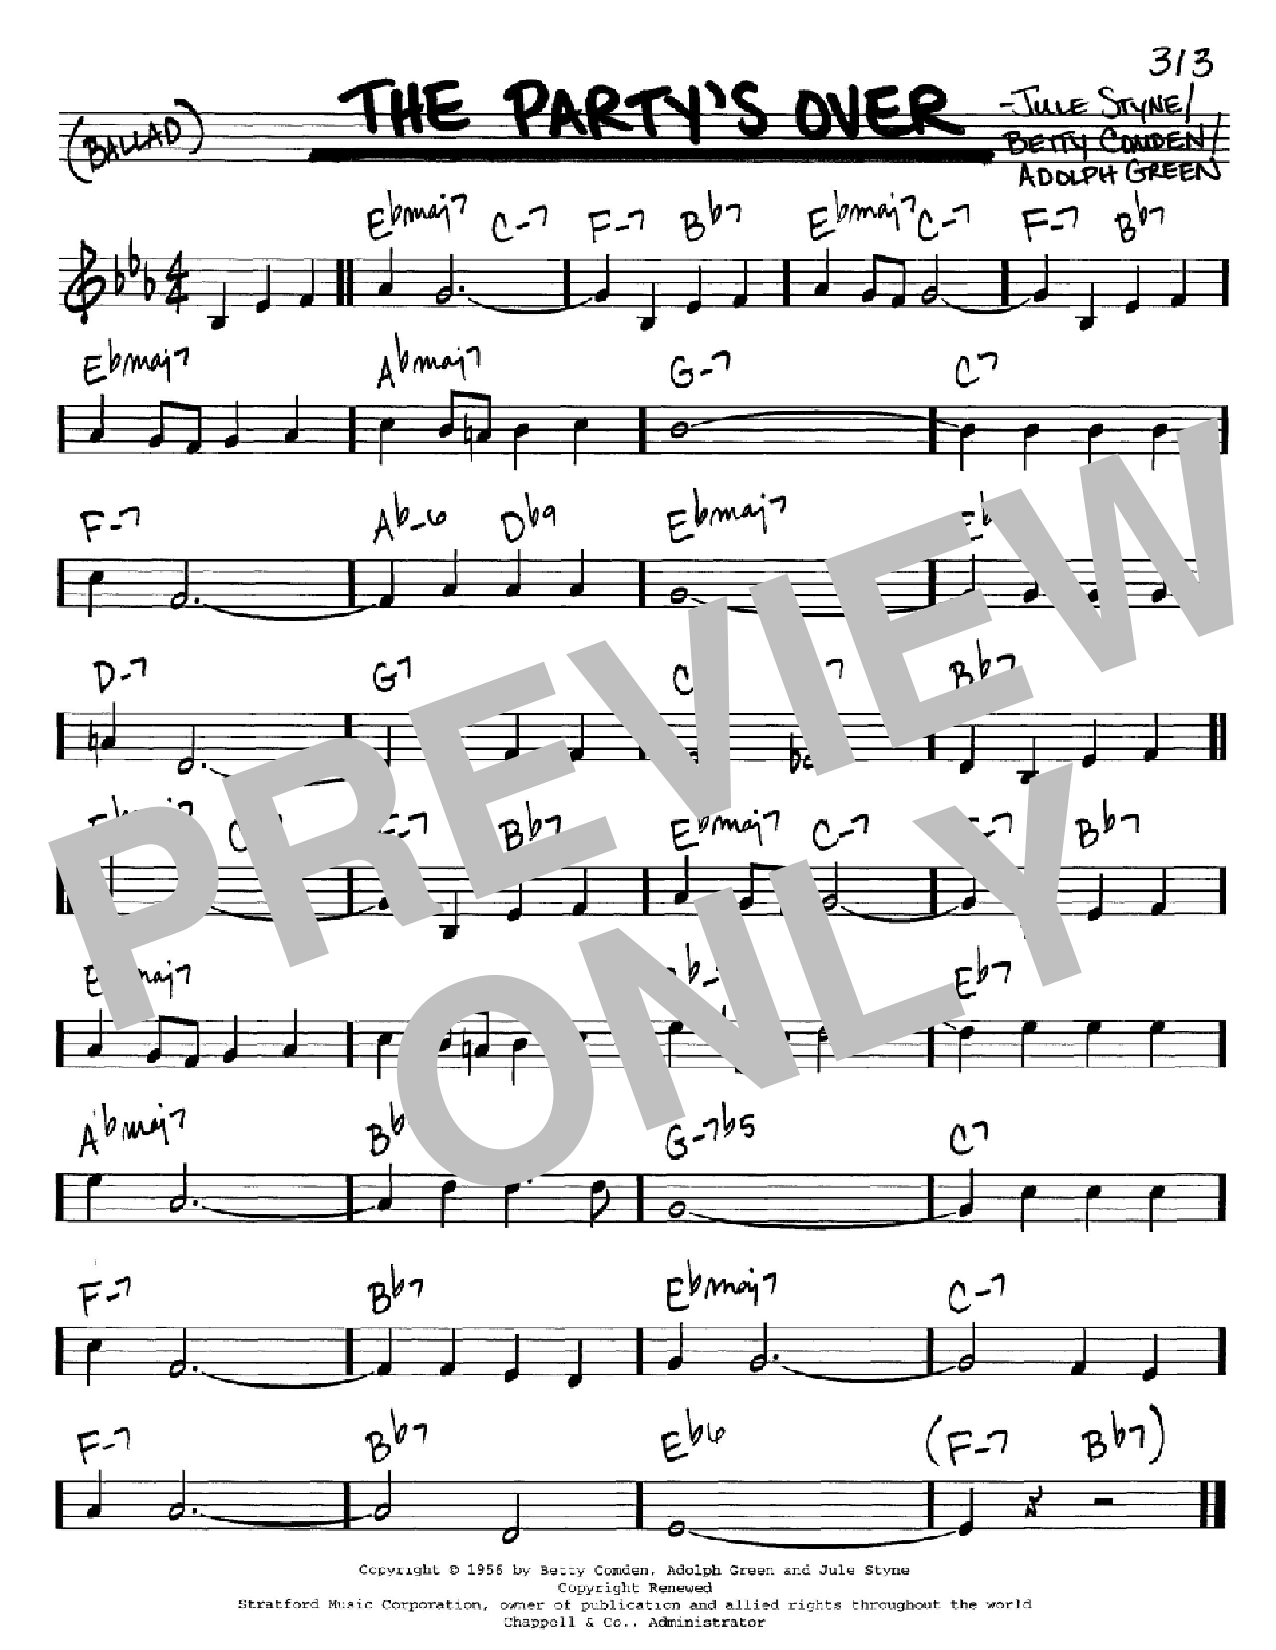 Download Betty Comden The Party's Over Sheet Music